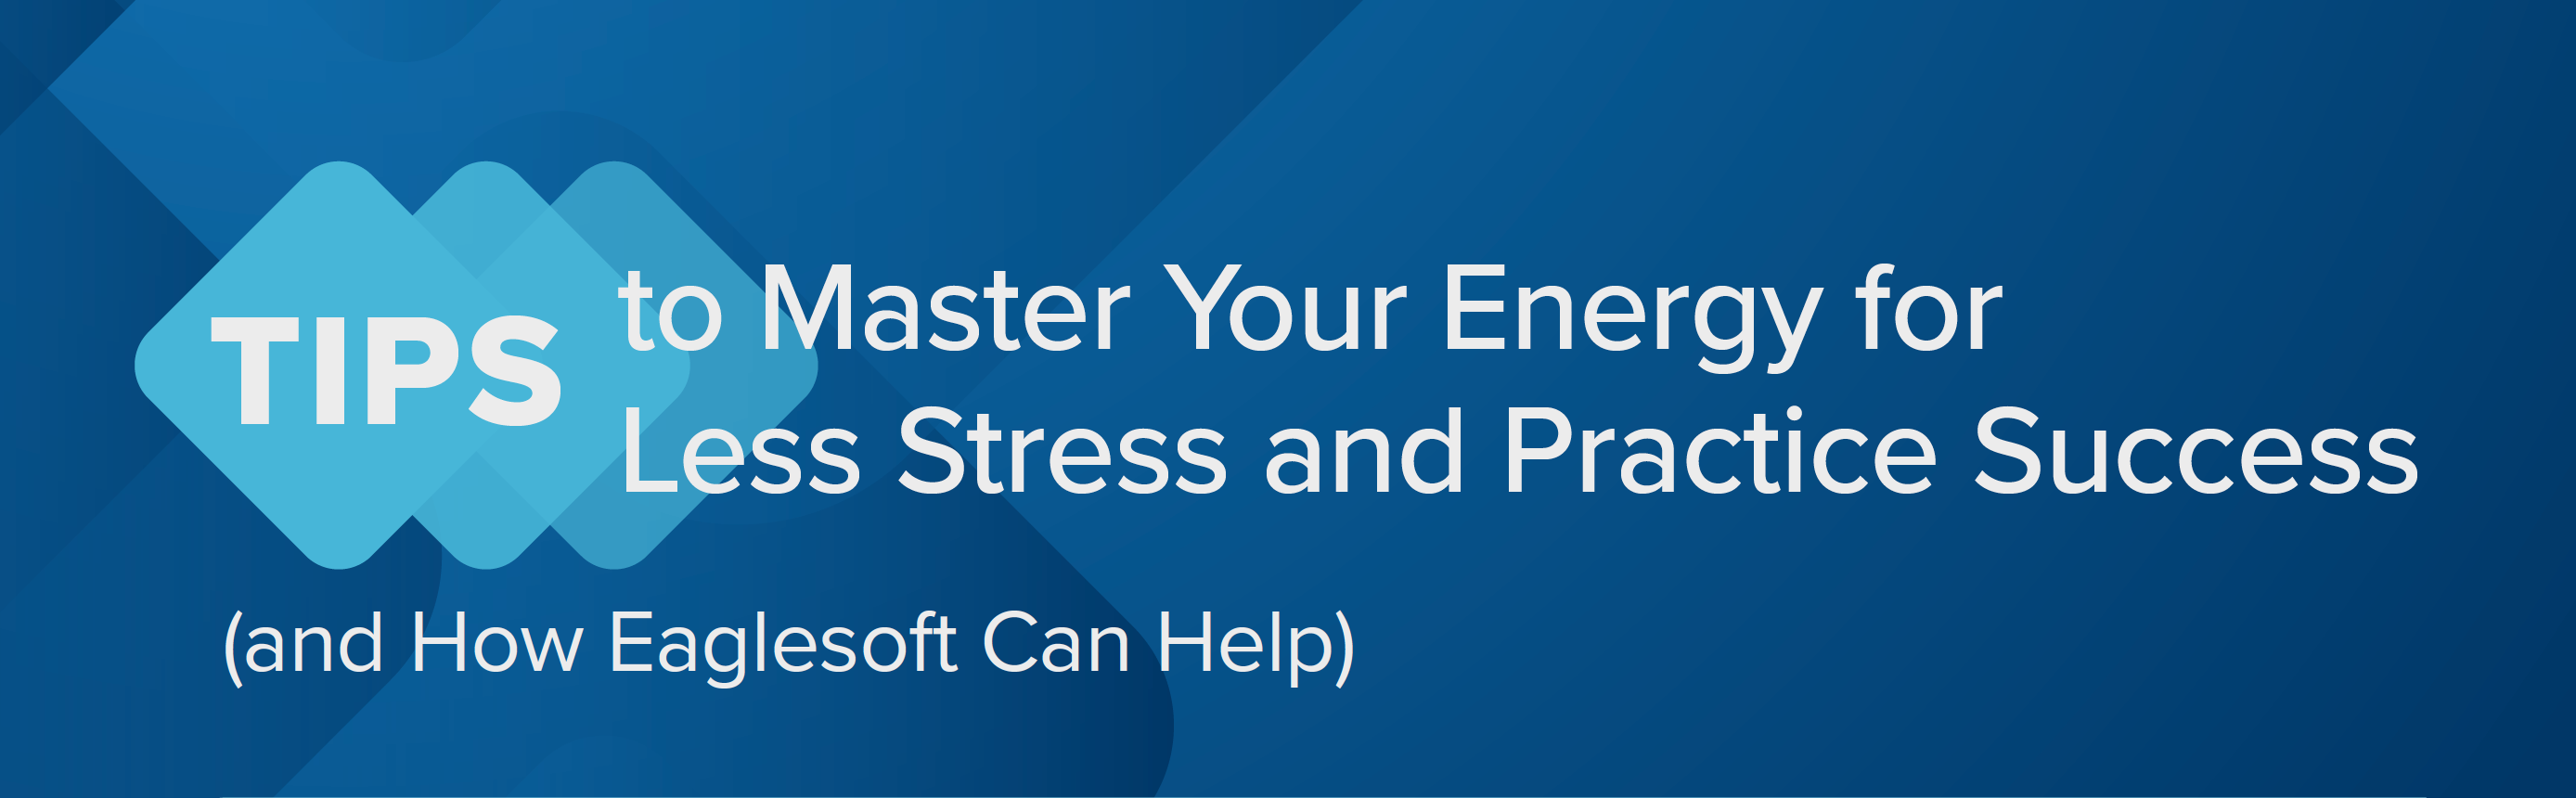 E-Book Download: Tips to Master Your Energy for Less Stress and Practice Success